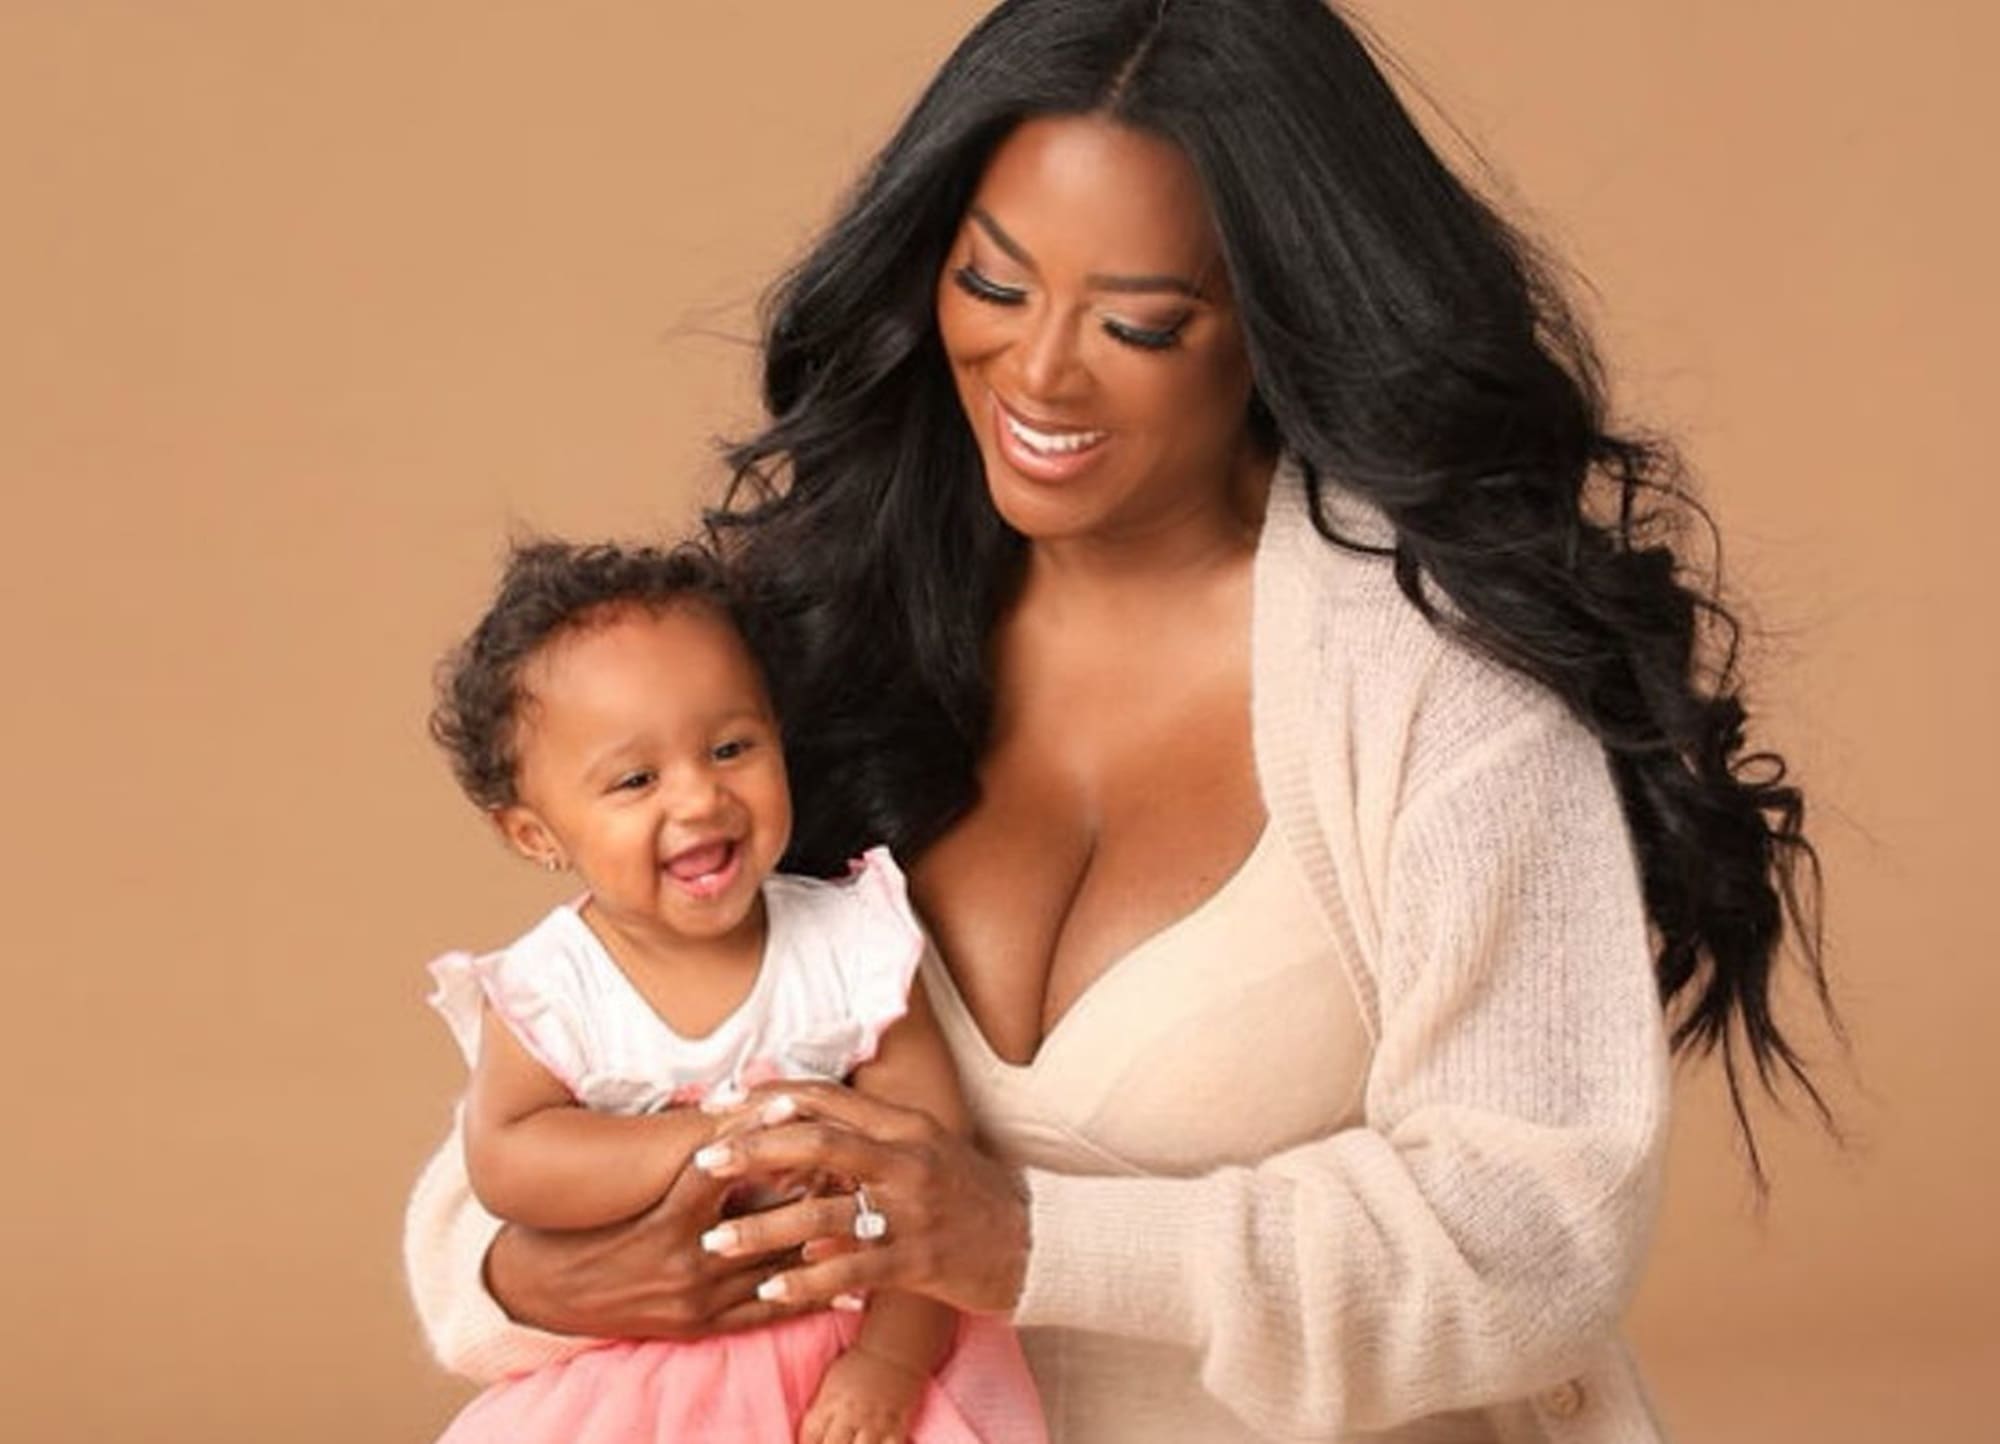 Kenya Moore Photo Of Her Precocious Baby Girl, Brooklyn Daly, Makes Fans Day